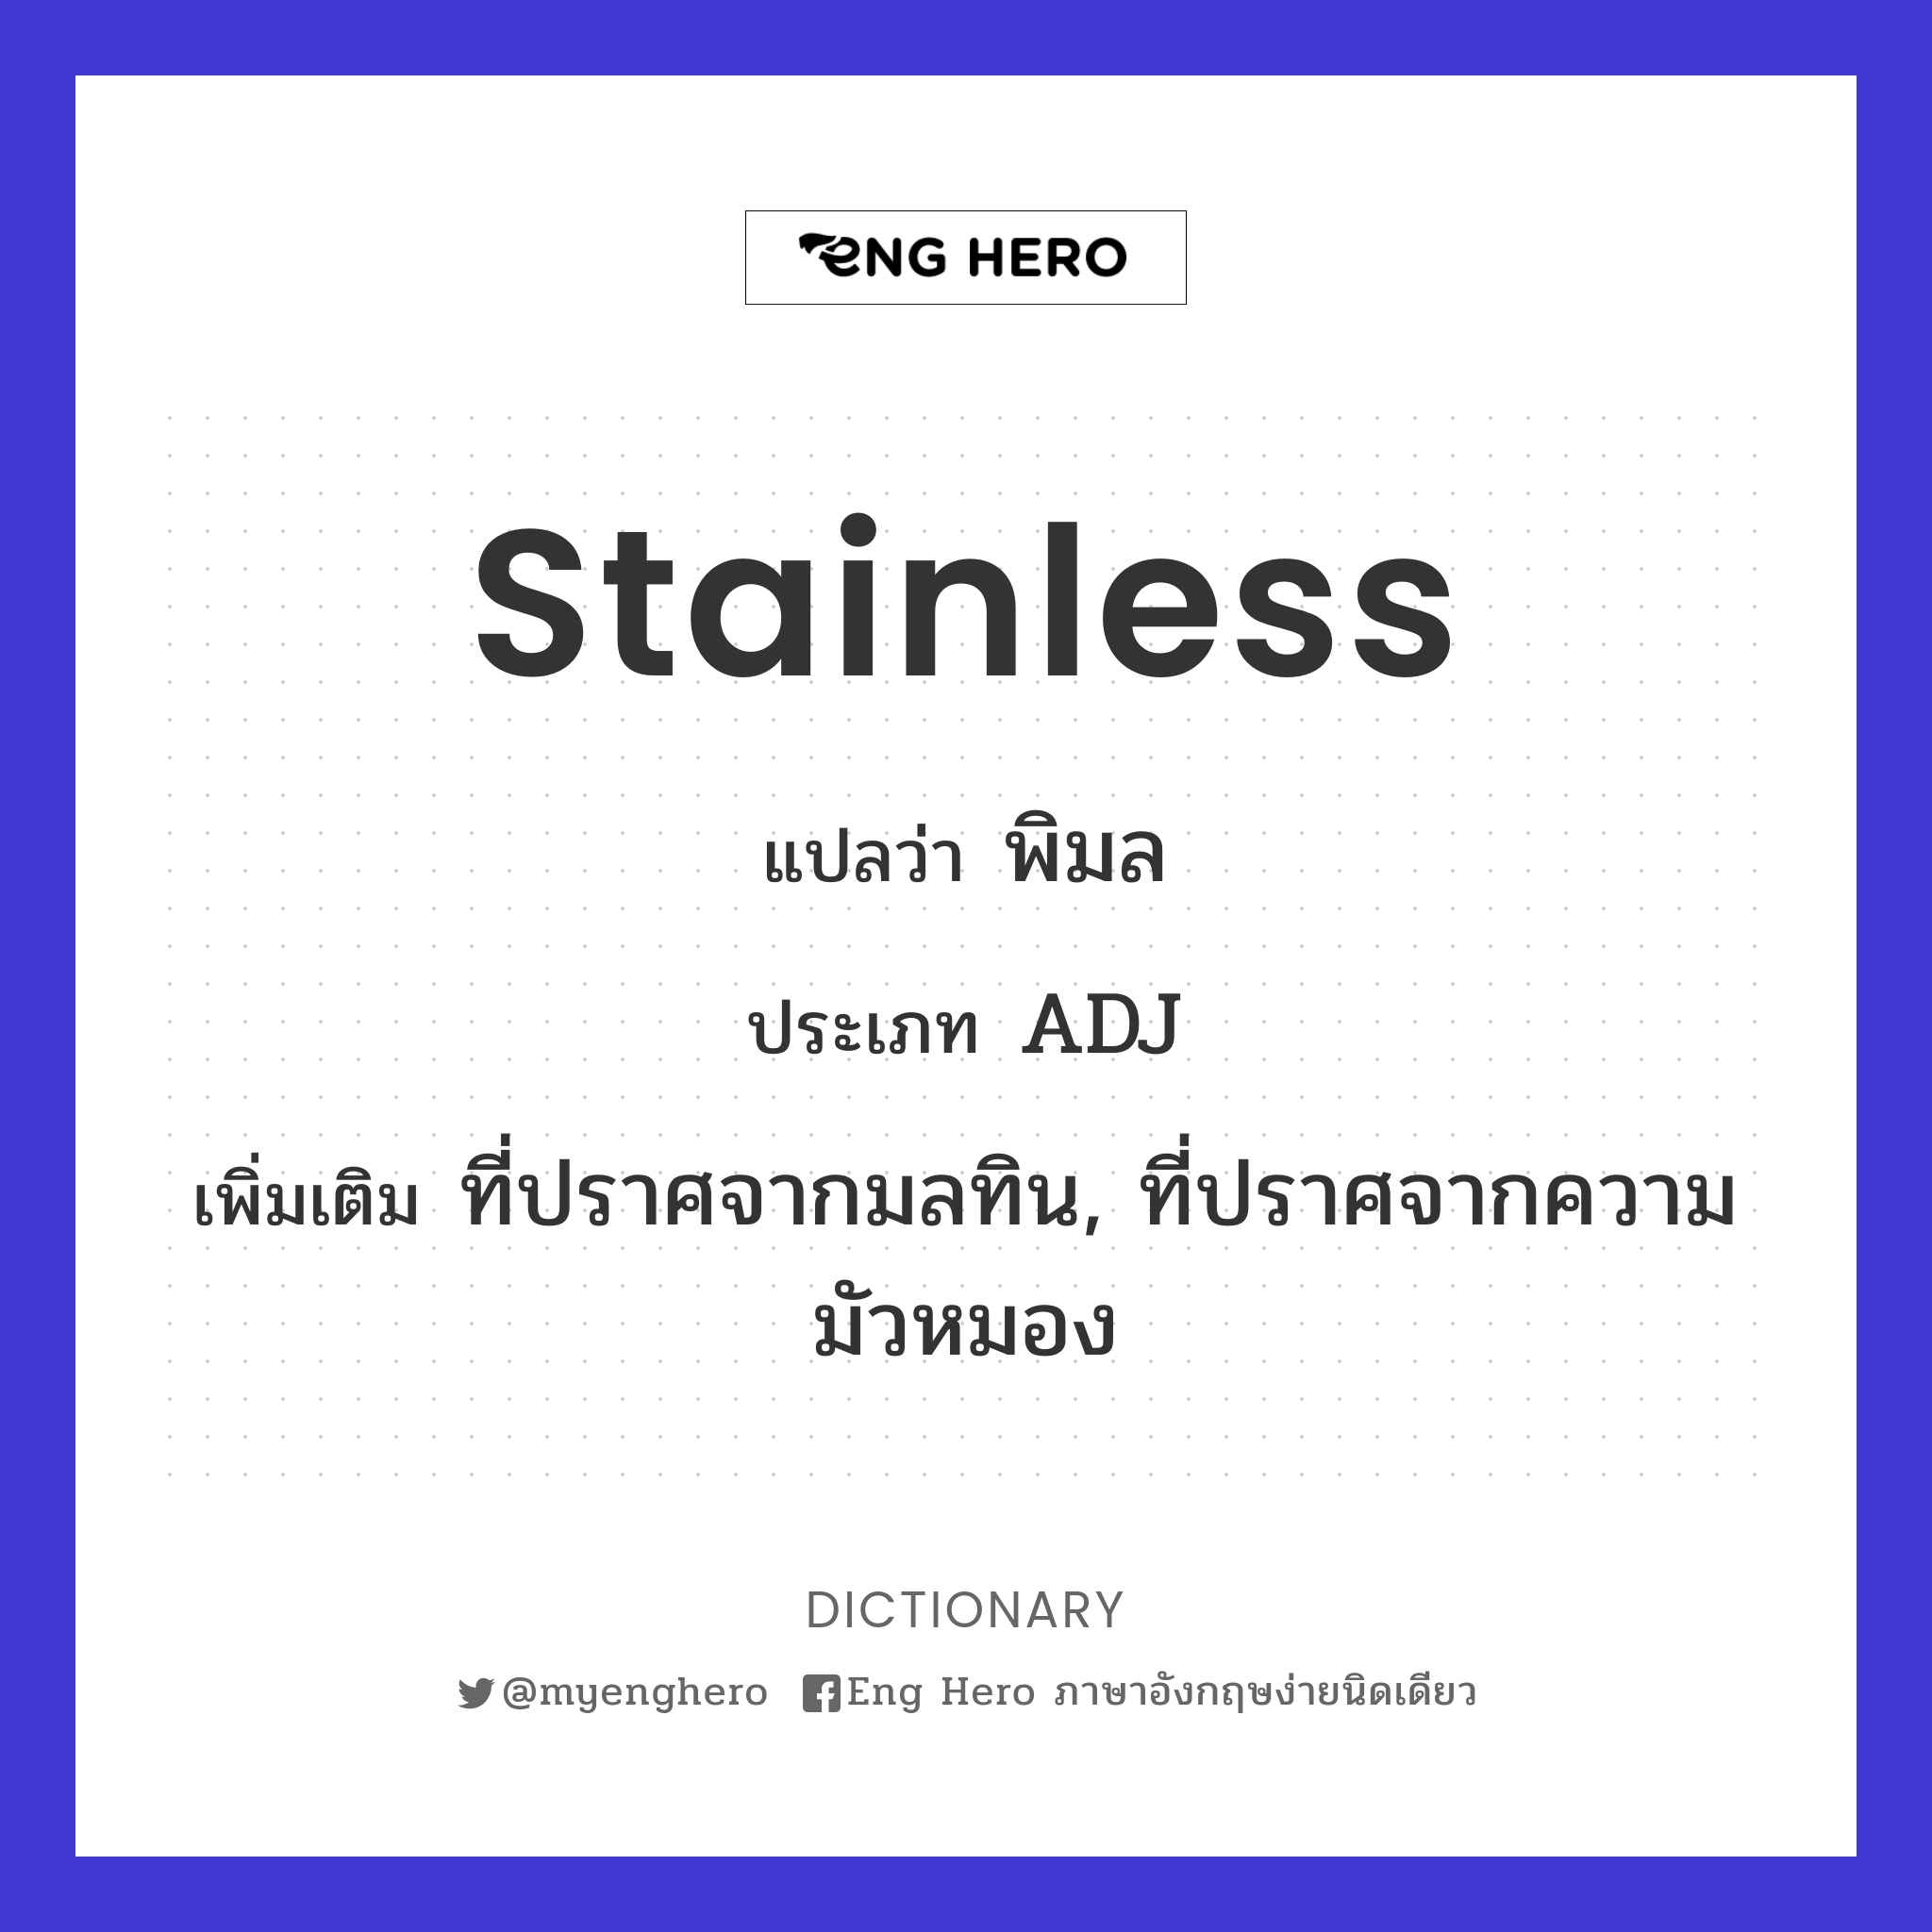 stainless